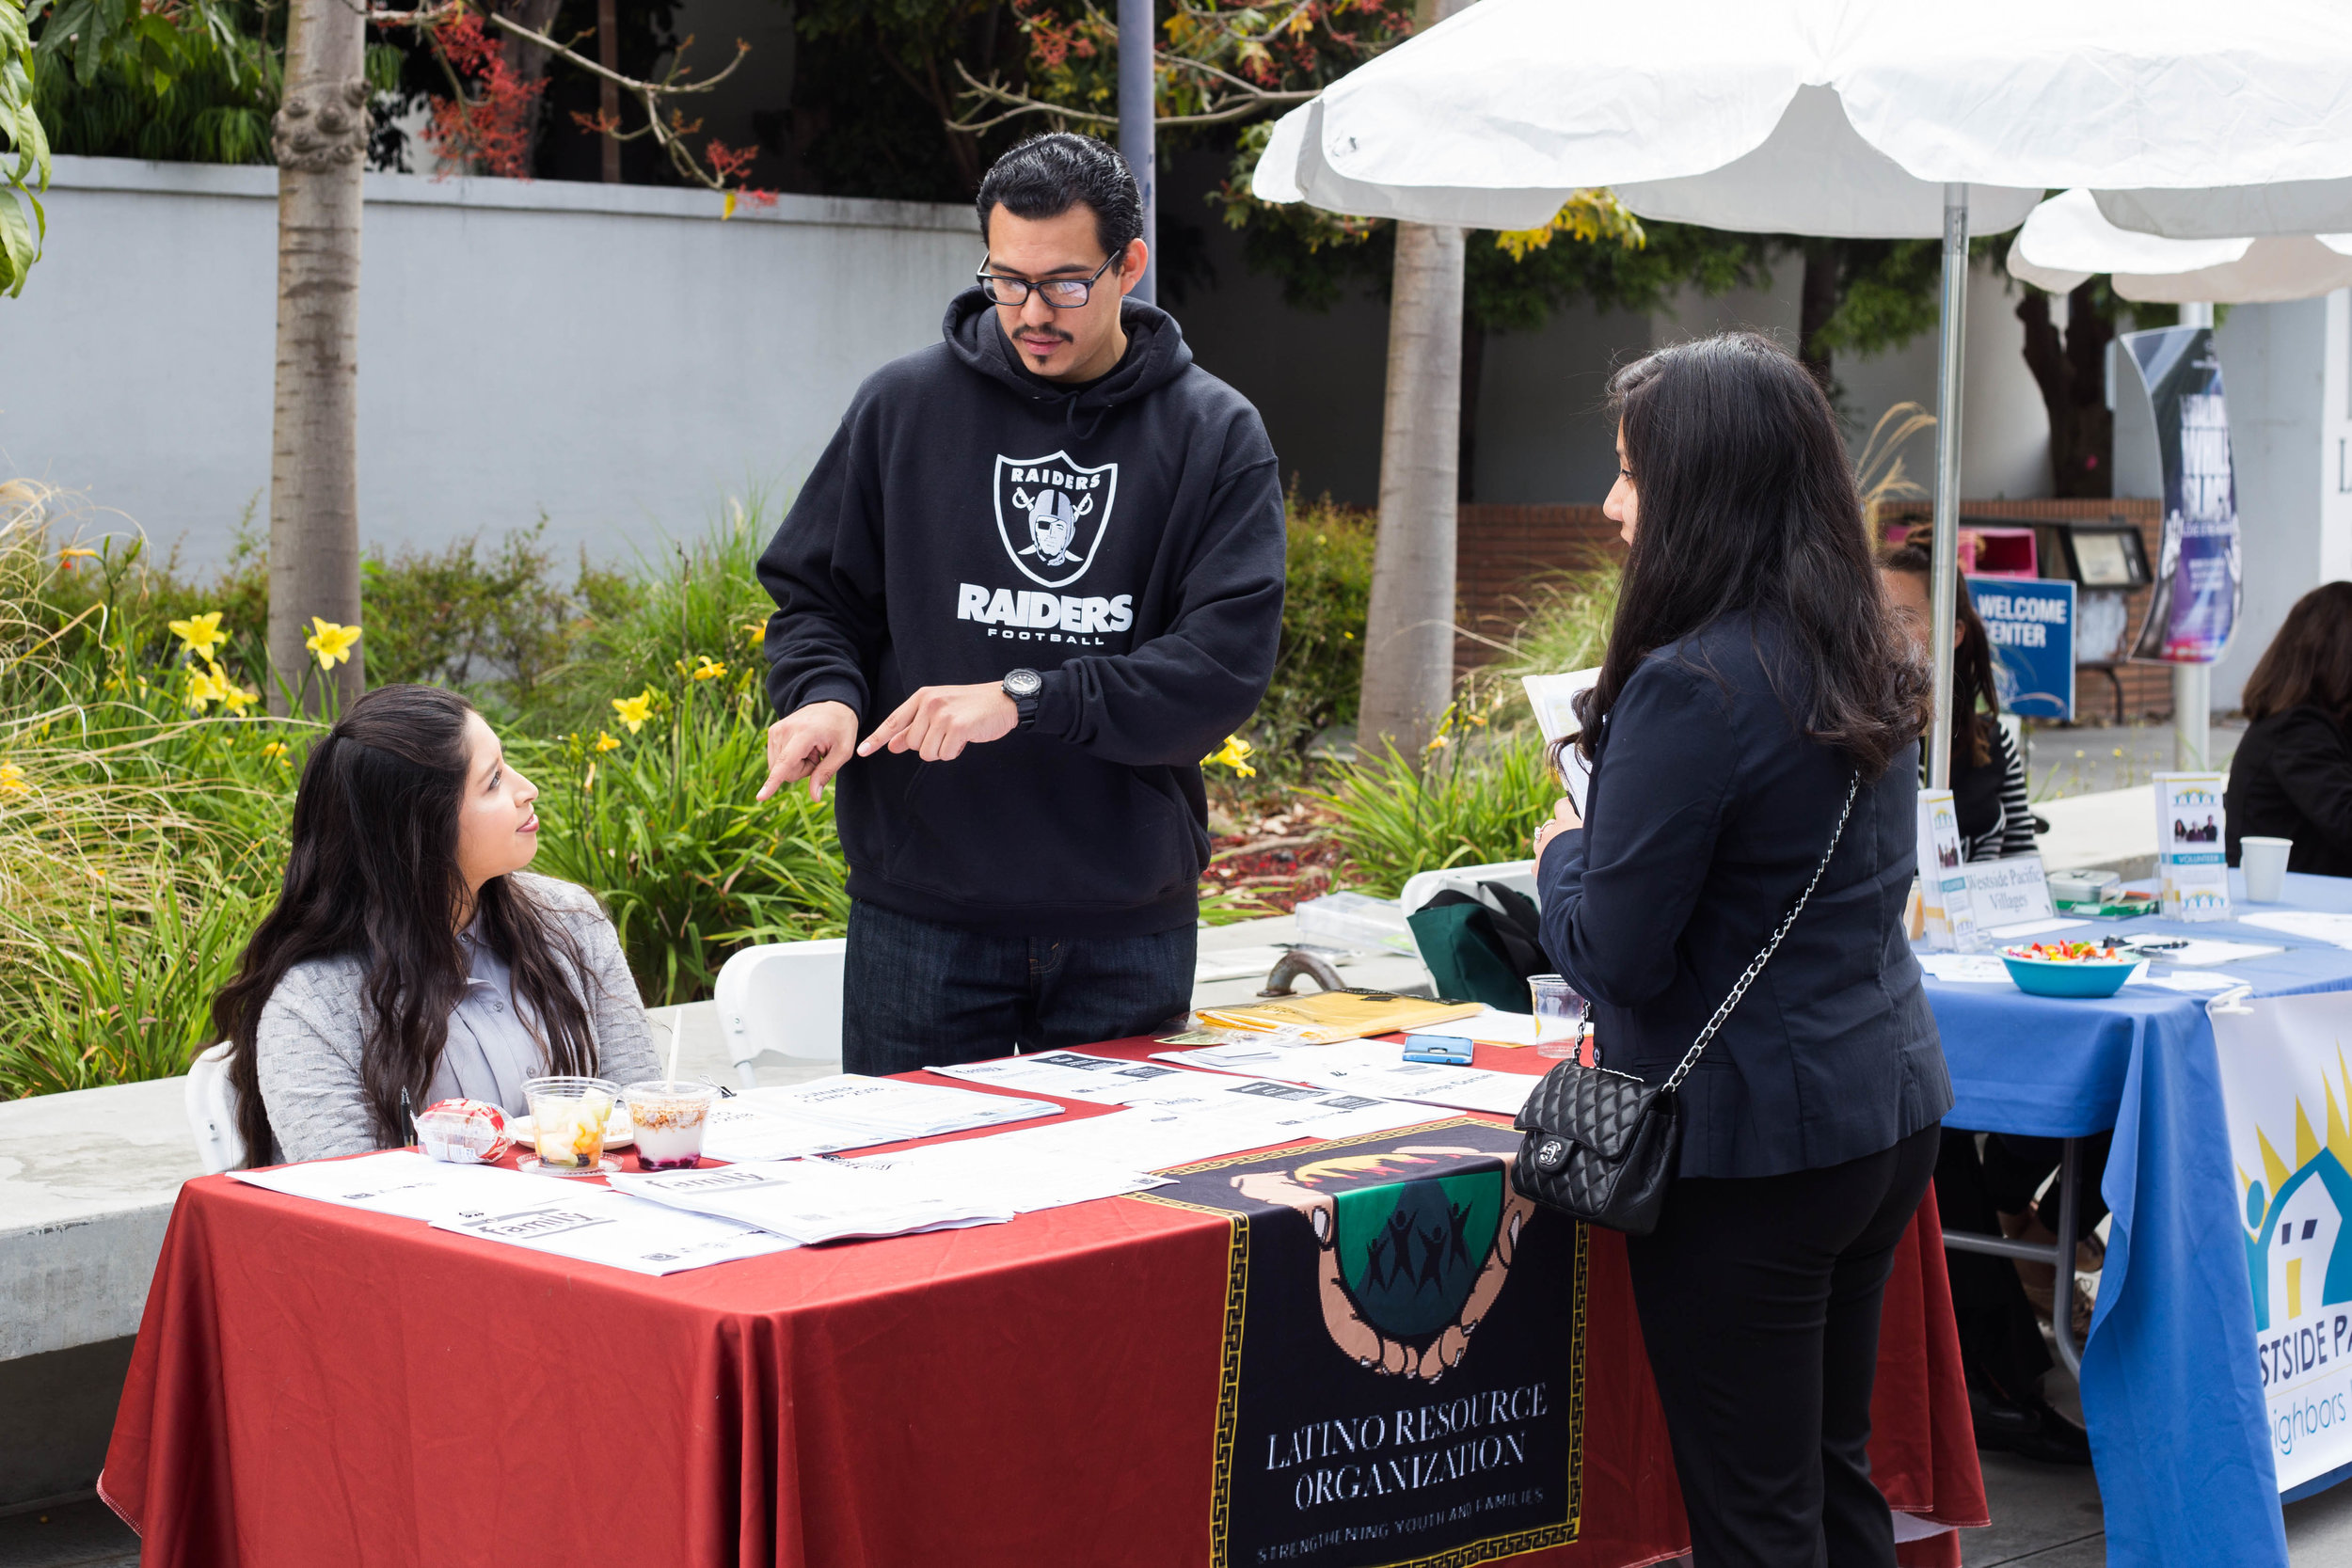  Santa Monica College (SMC) Internship Fair: (right) Isai Madrid, Youth Coordinator at West Los Angeles Family Source Center-Latino Resource Organization, and (left) Adriana Garcia, talking to a SMC student about their goals at the organization. SMC 